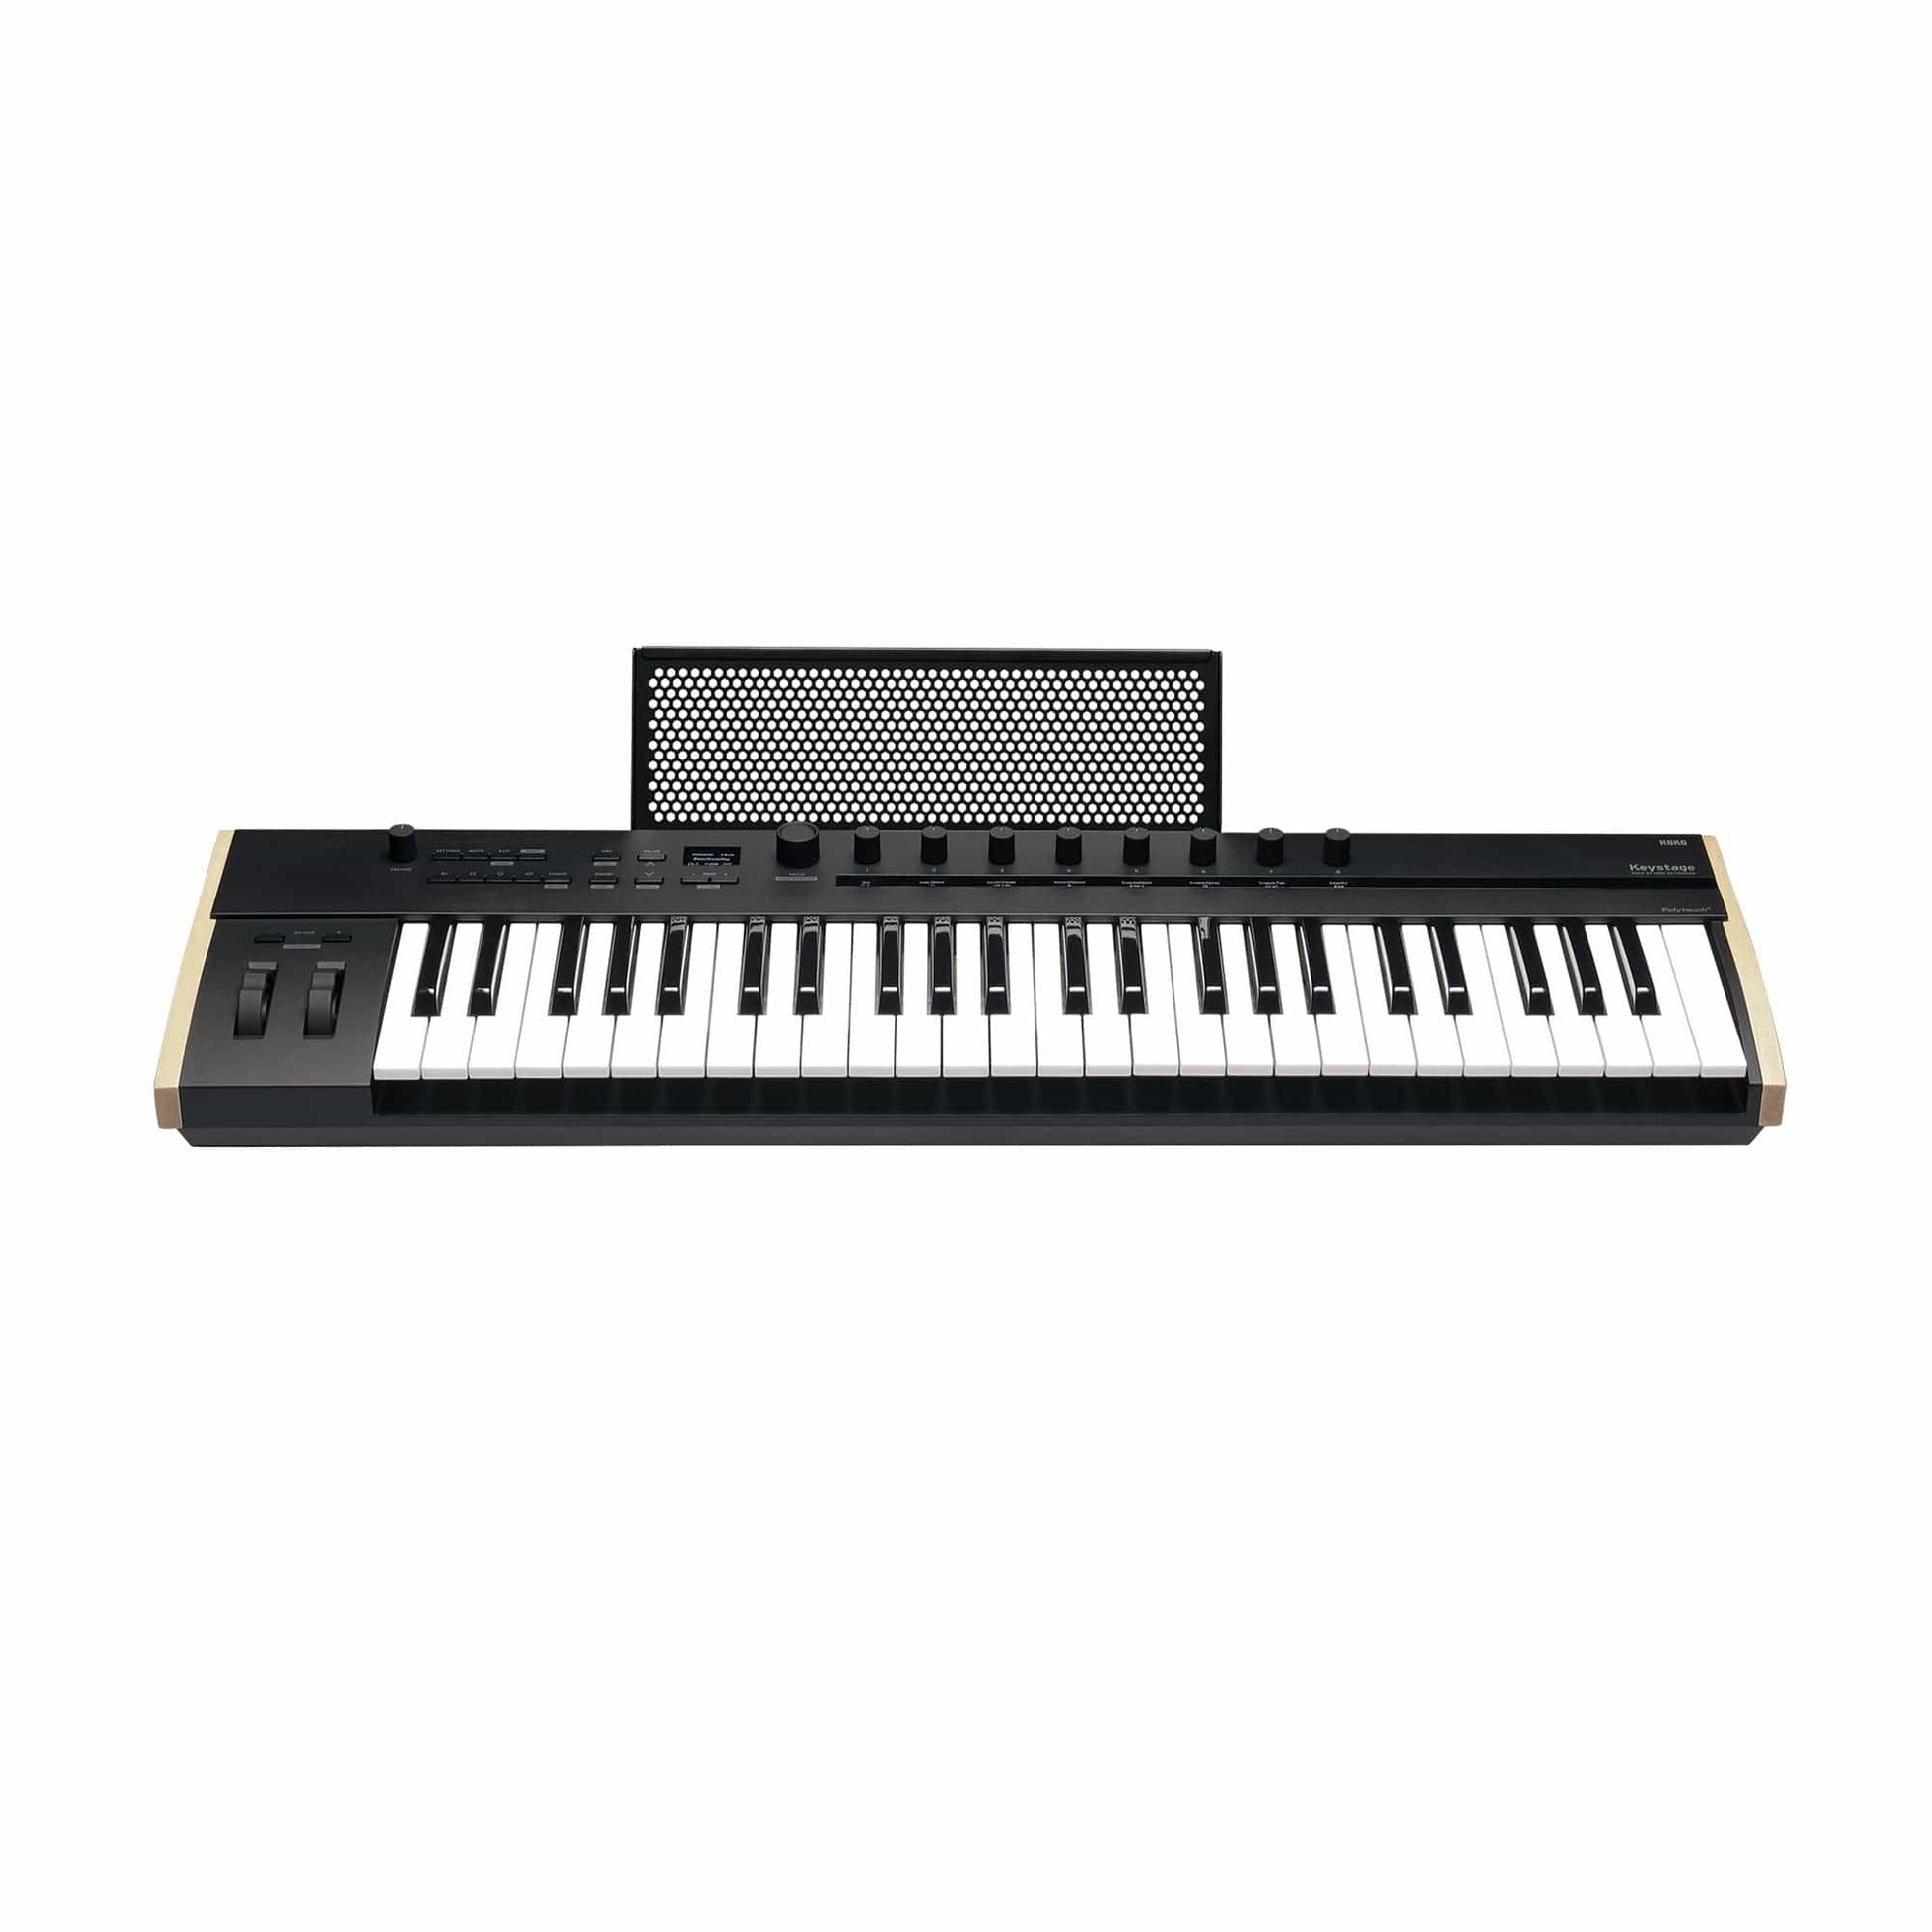 Korg Keystage 49 MIDI-Controller with Polyphonic Aftertouch Effects and Pedals / Controllers, Volume and Expression